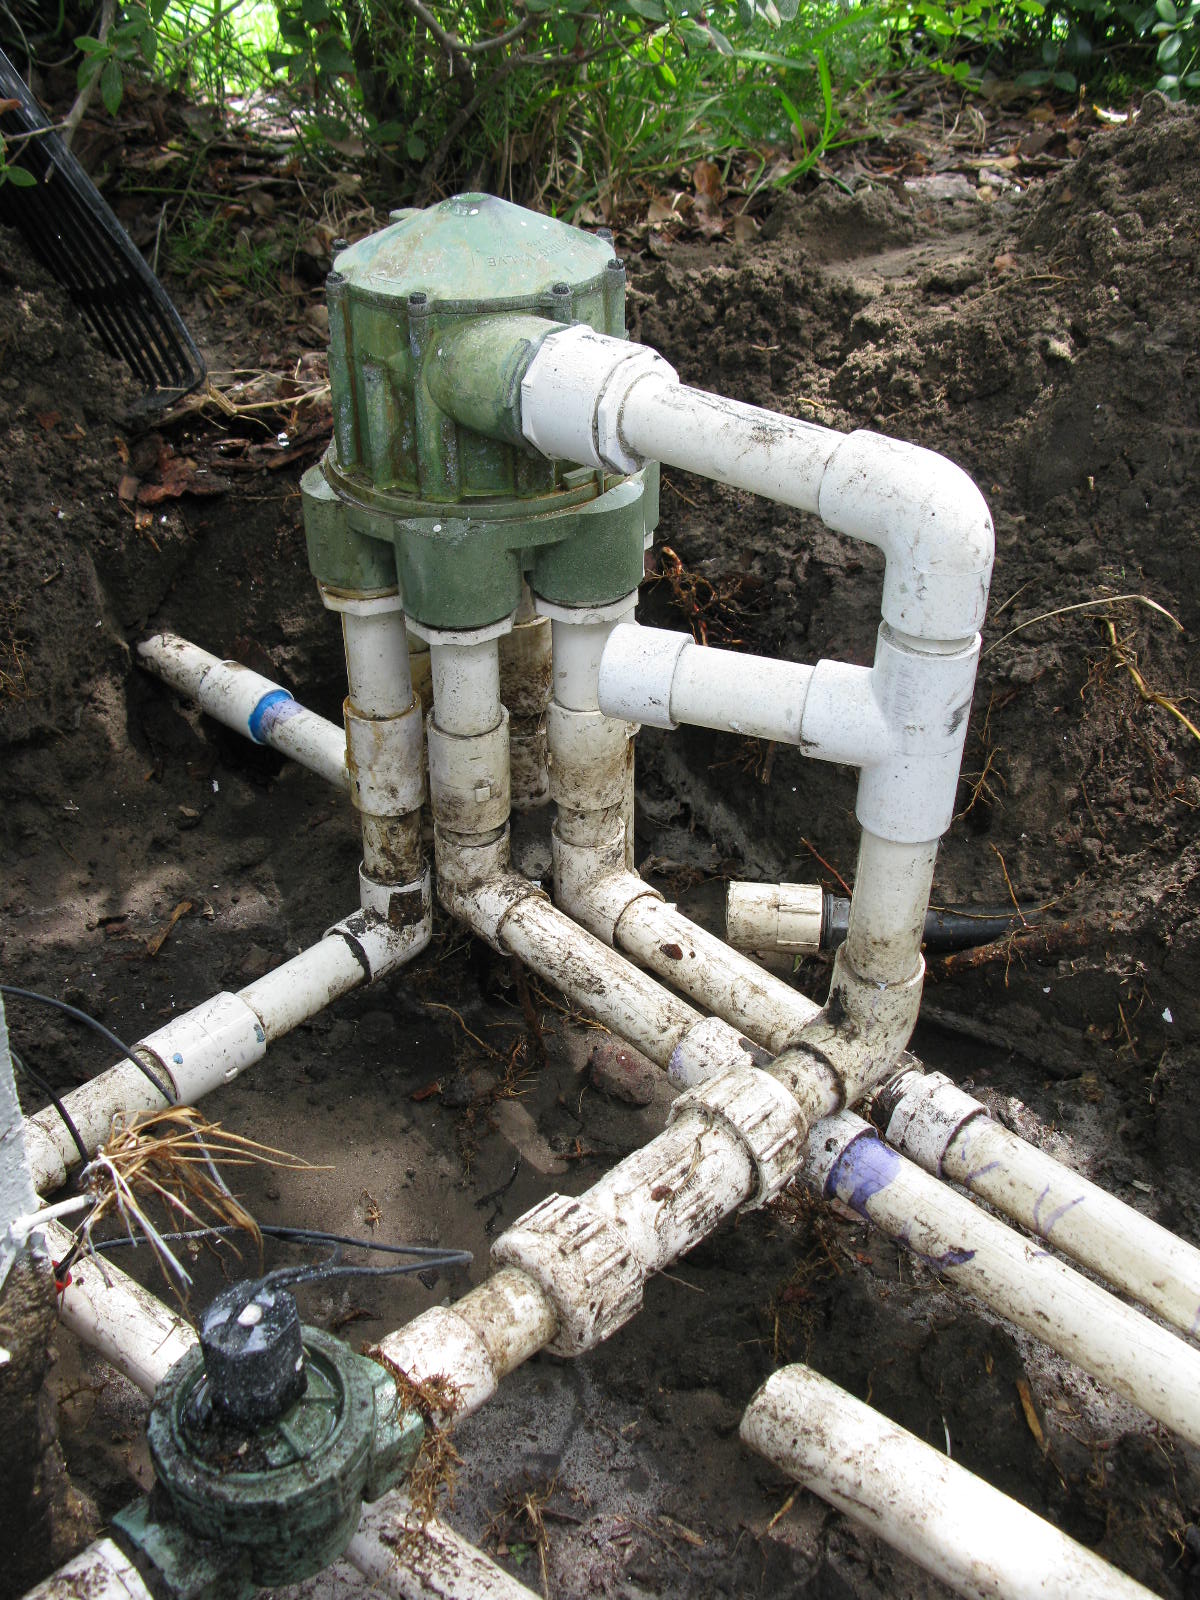 Valve Replacement: Valve Replacement Sprinkler System